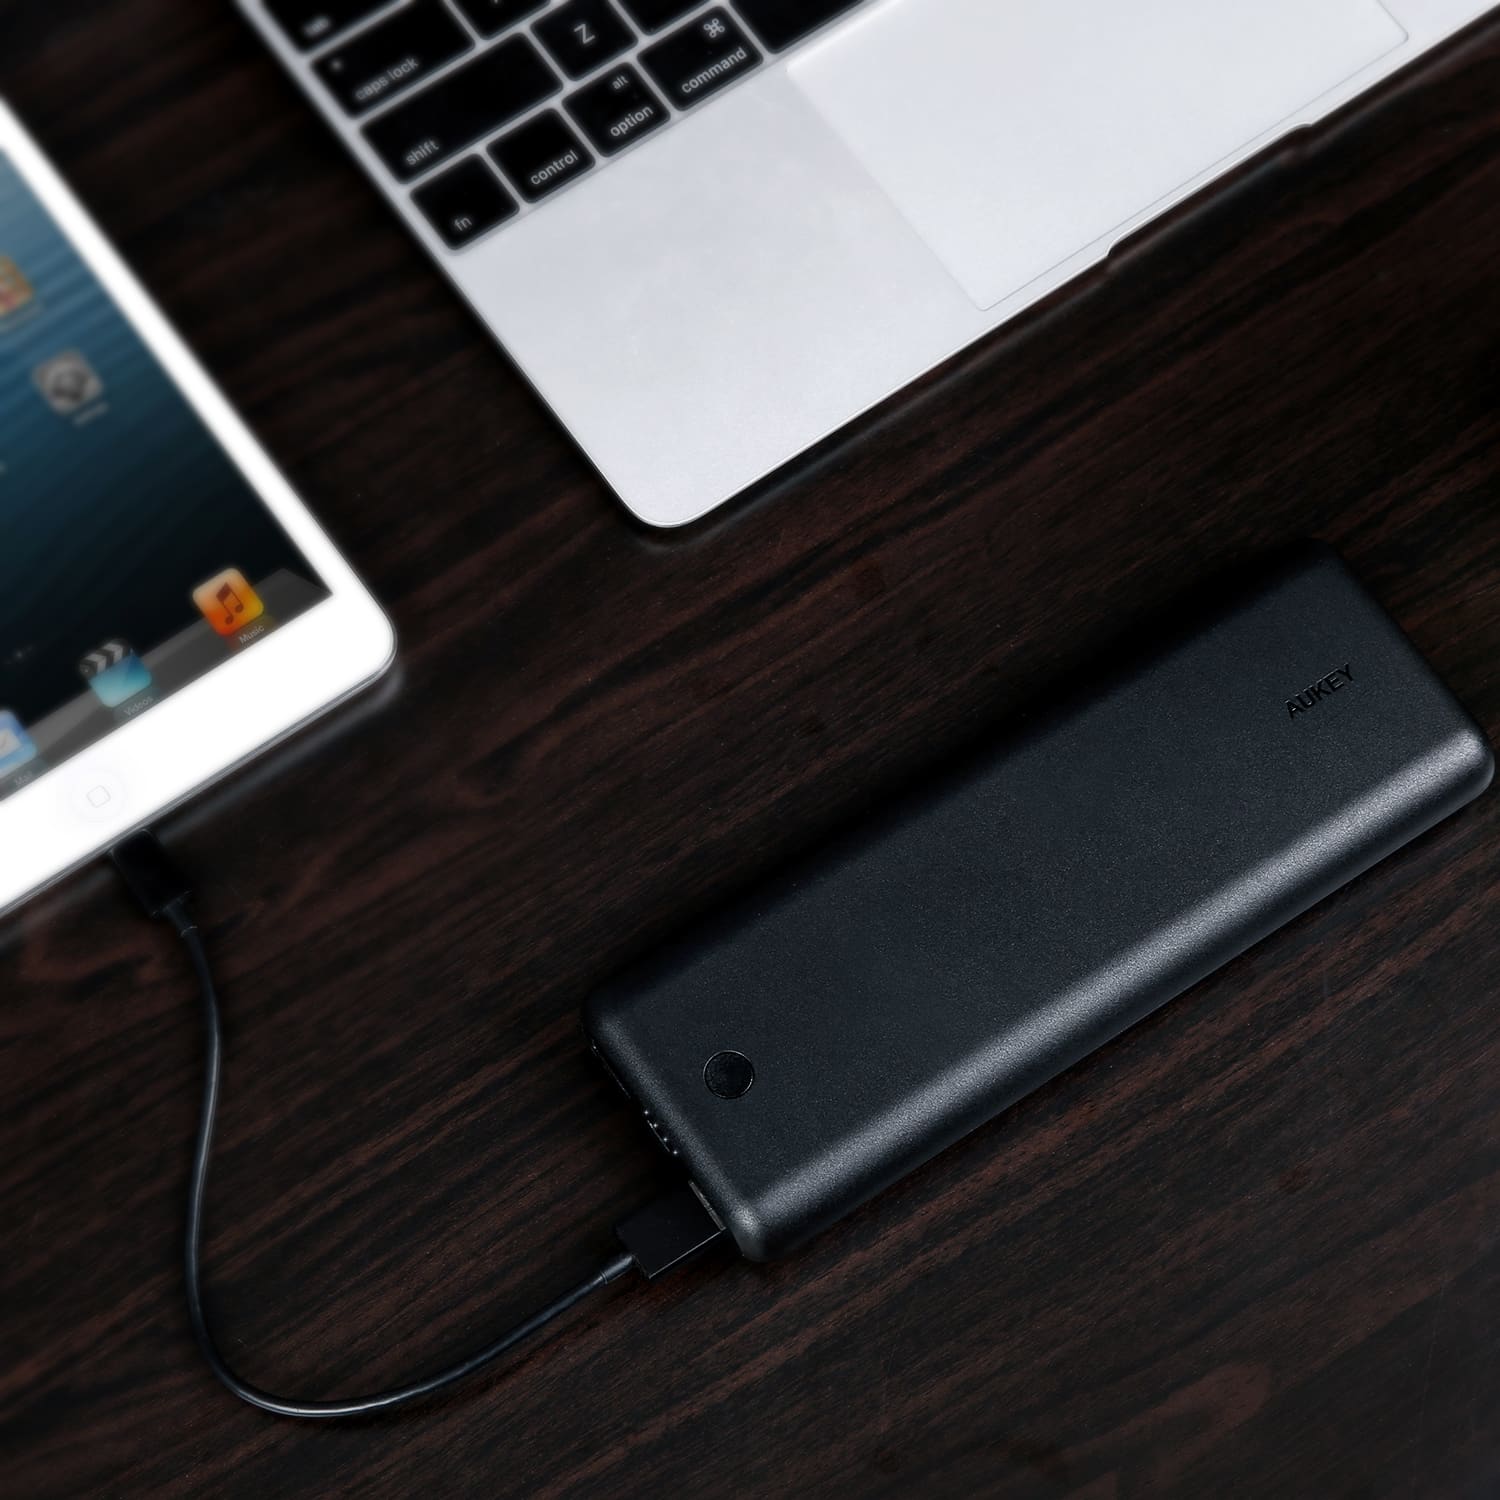 AUKEY PB-BY20 20100mAh Power Force Series USB C Power Bank - Aukey Malaysia Official Store